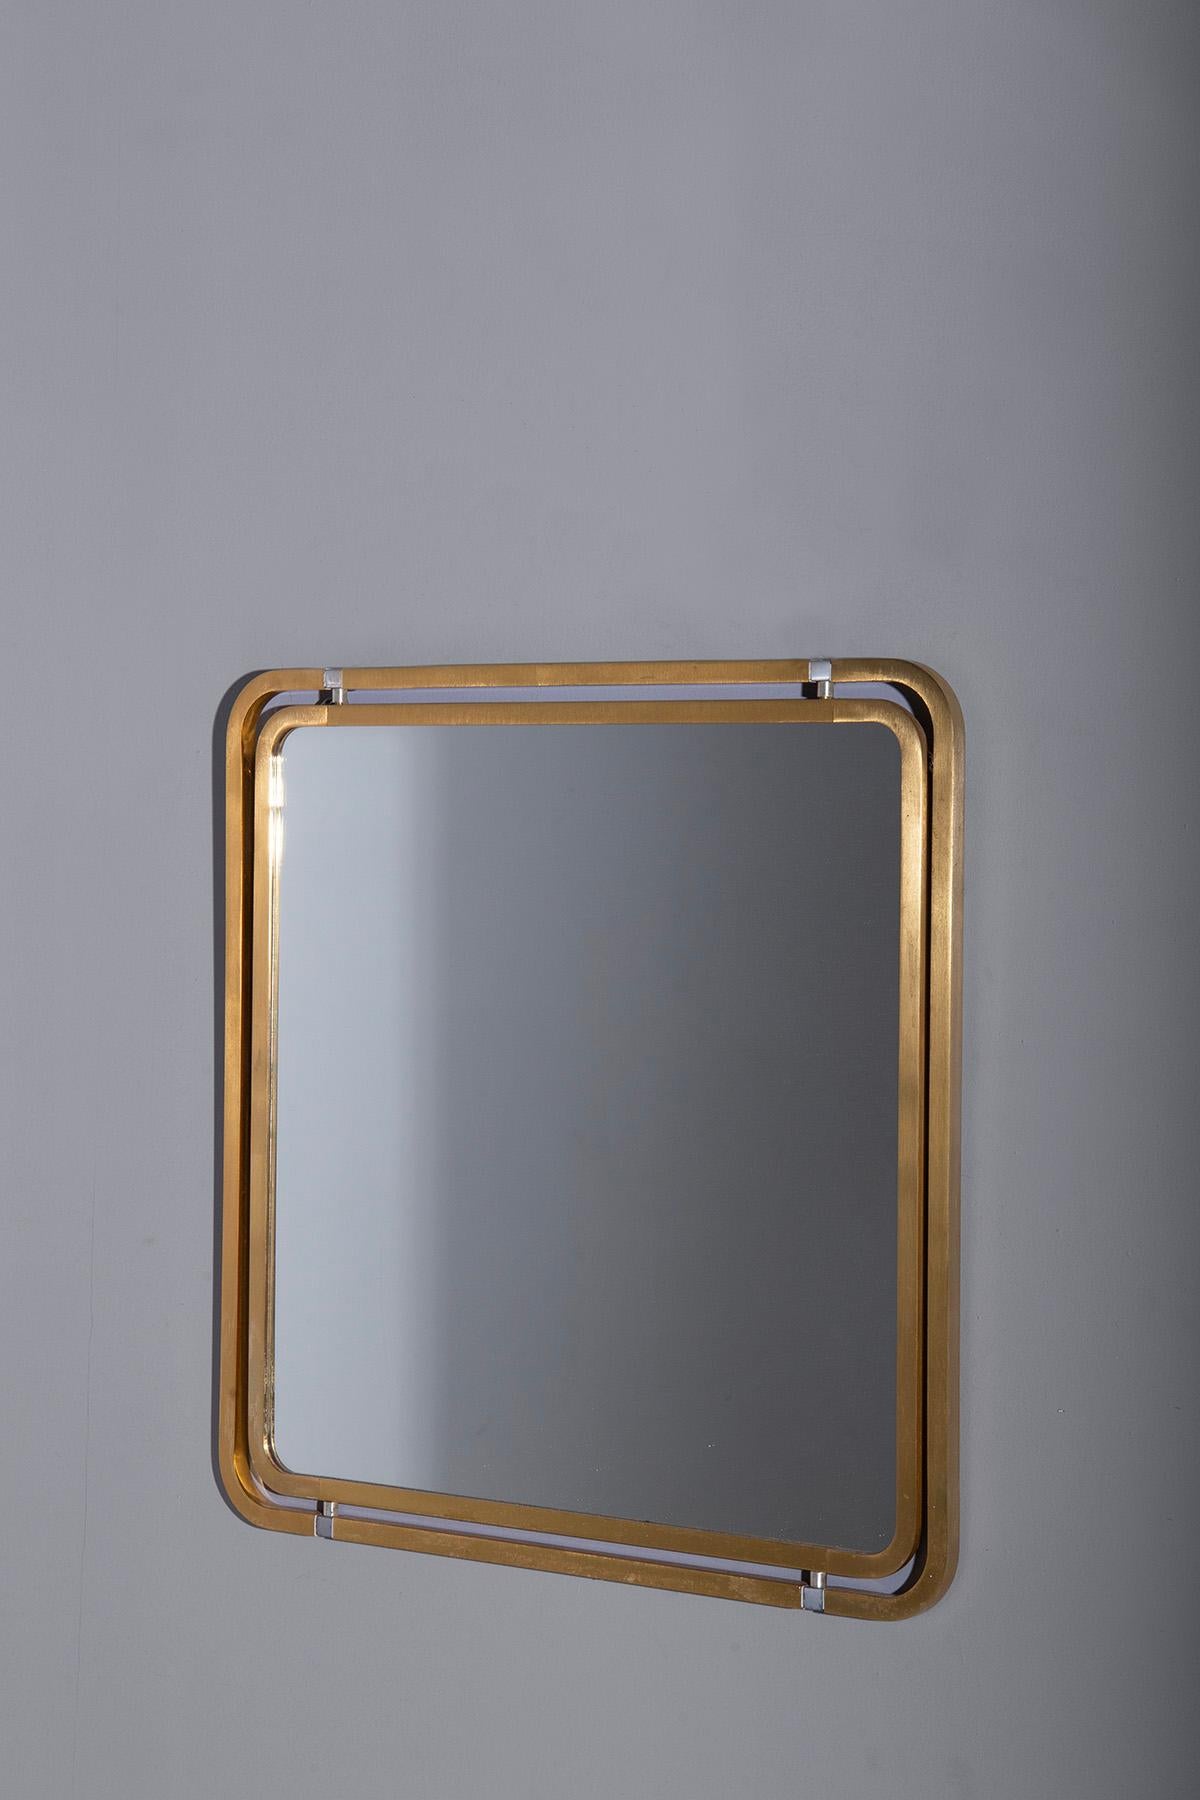 Step into the glamorous world of 1960s Italian design with this exquisite vintage gilt metal mirror. A true embodiment of the era's modern and essential aesthetic, it stands as a radiant testament to the artistry of its time.

The mirror's design is